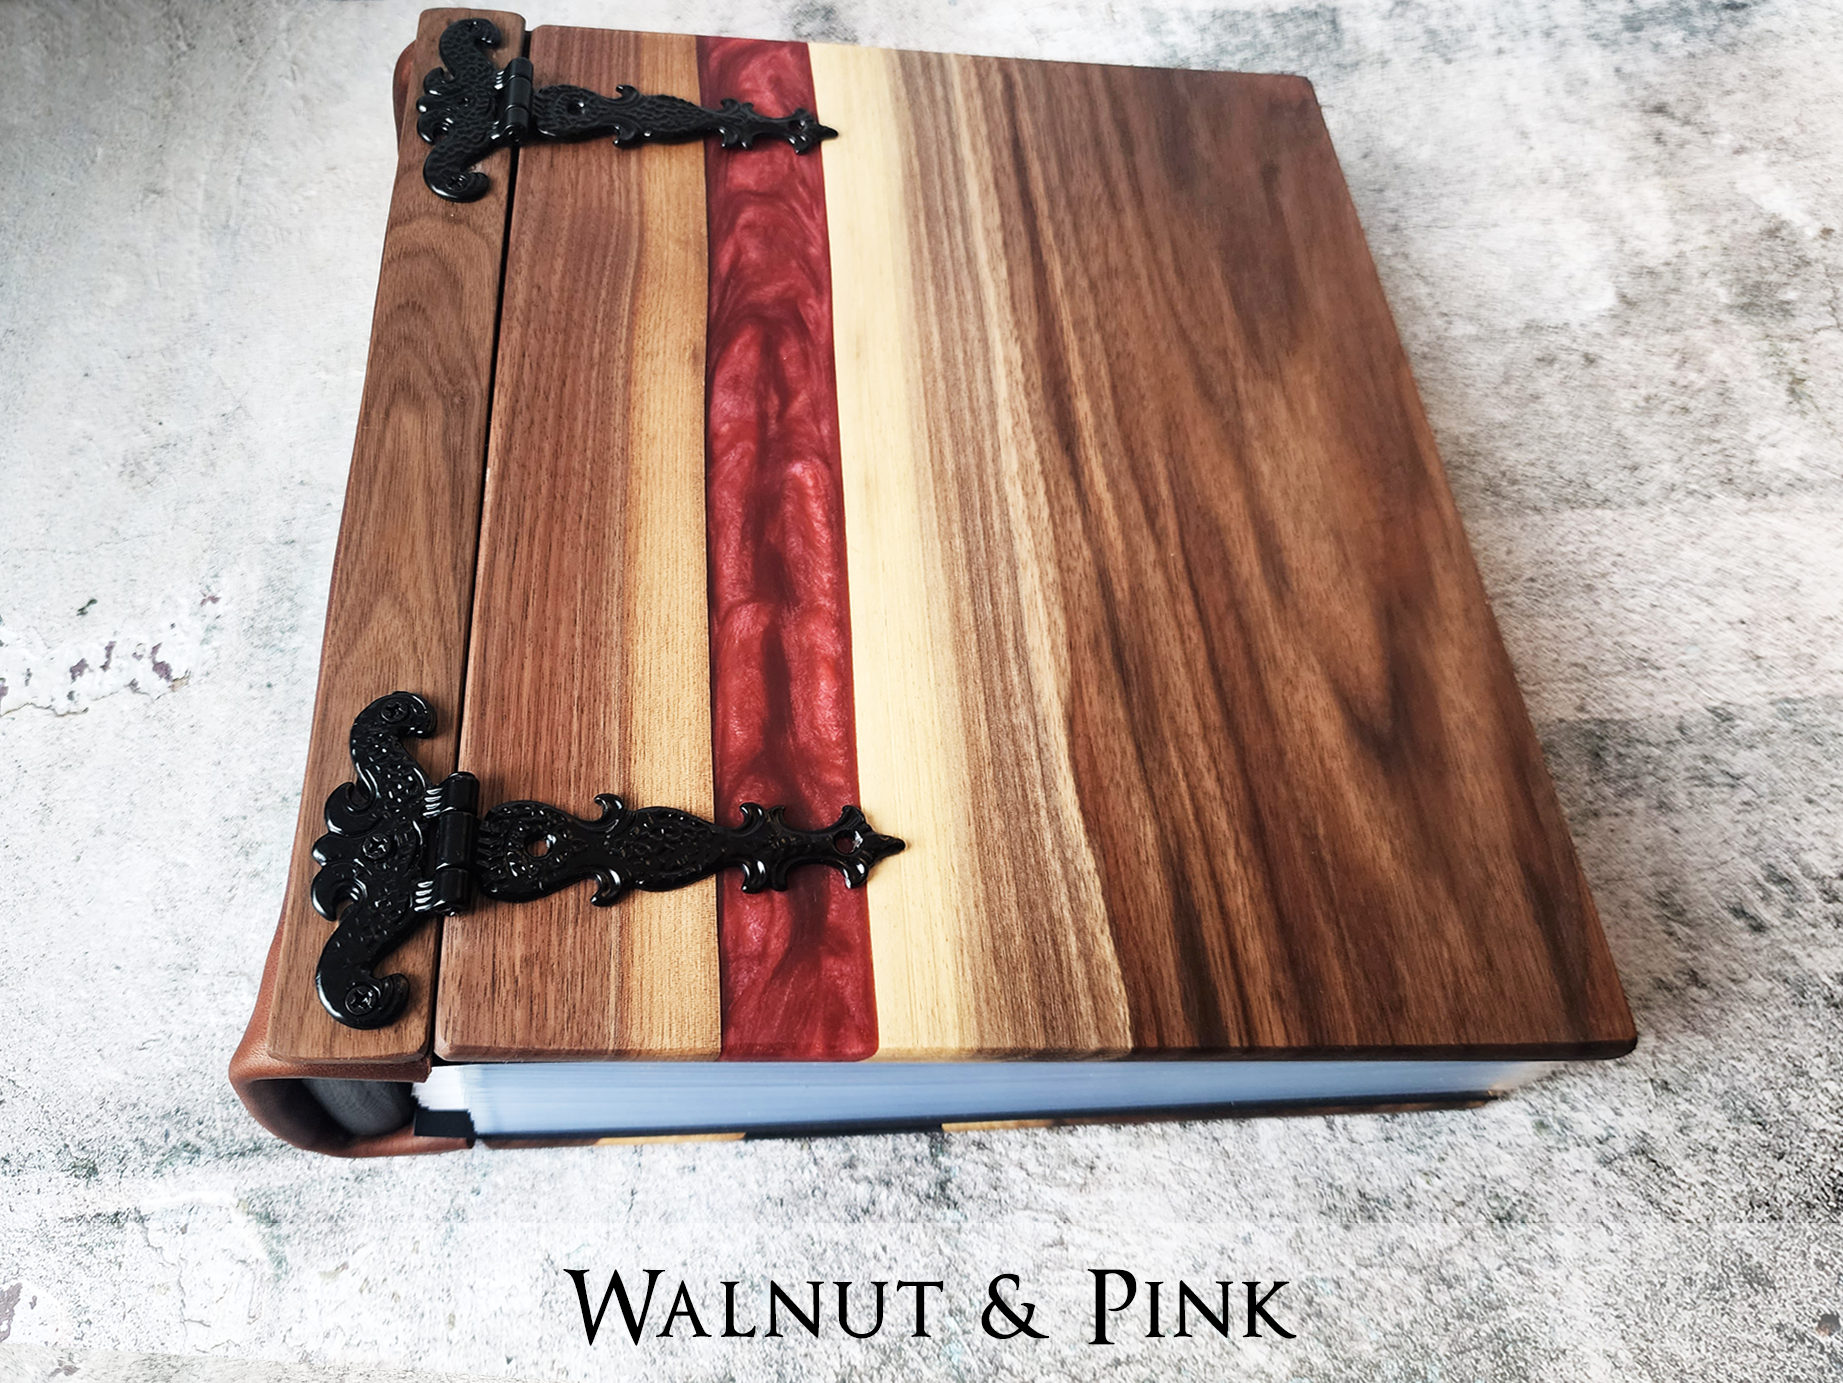  Preserve wine labels in style with a personalized collectors book featuring a river table wood and epoxy cover by Tylir Wisdom at Rustic Engravings.